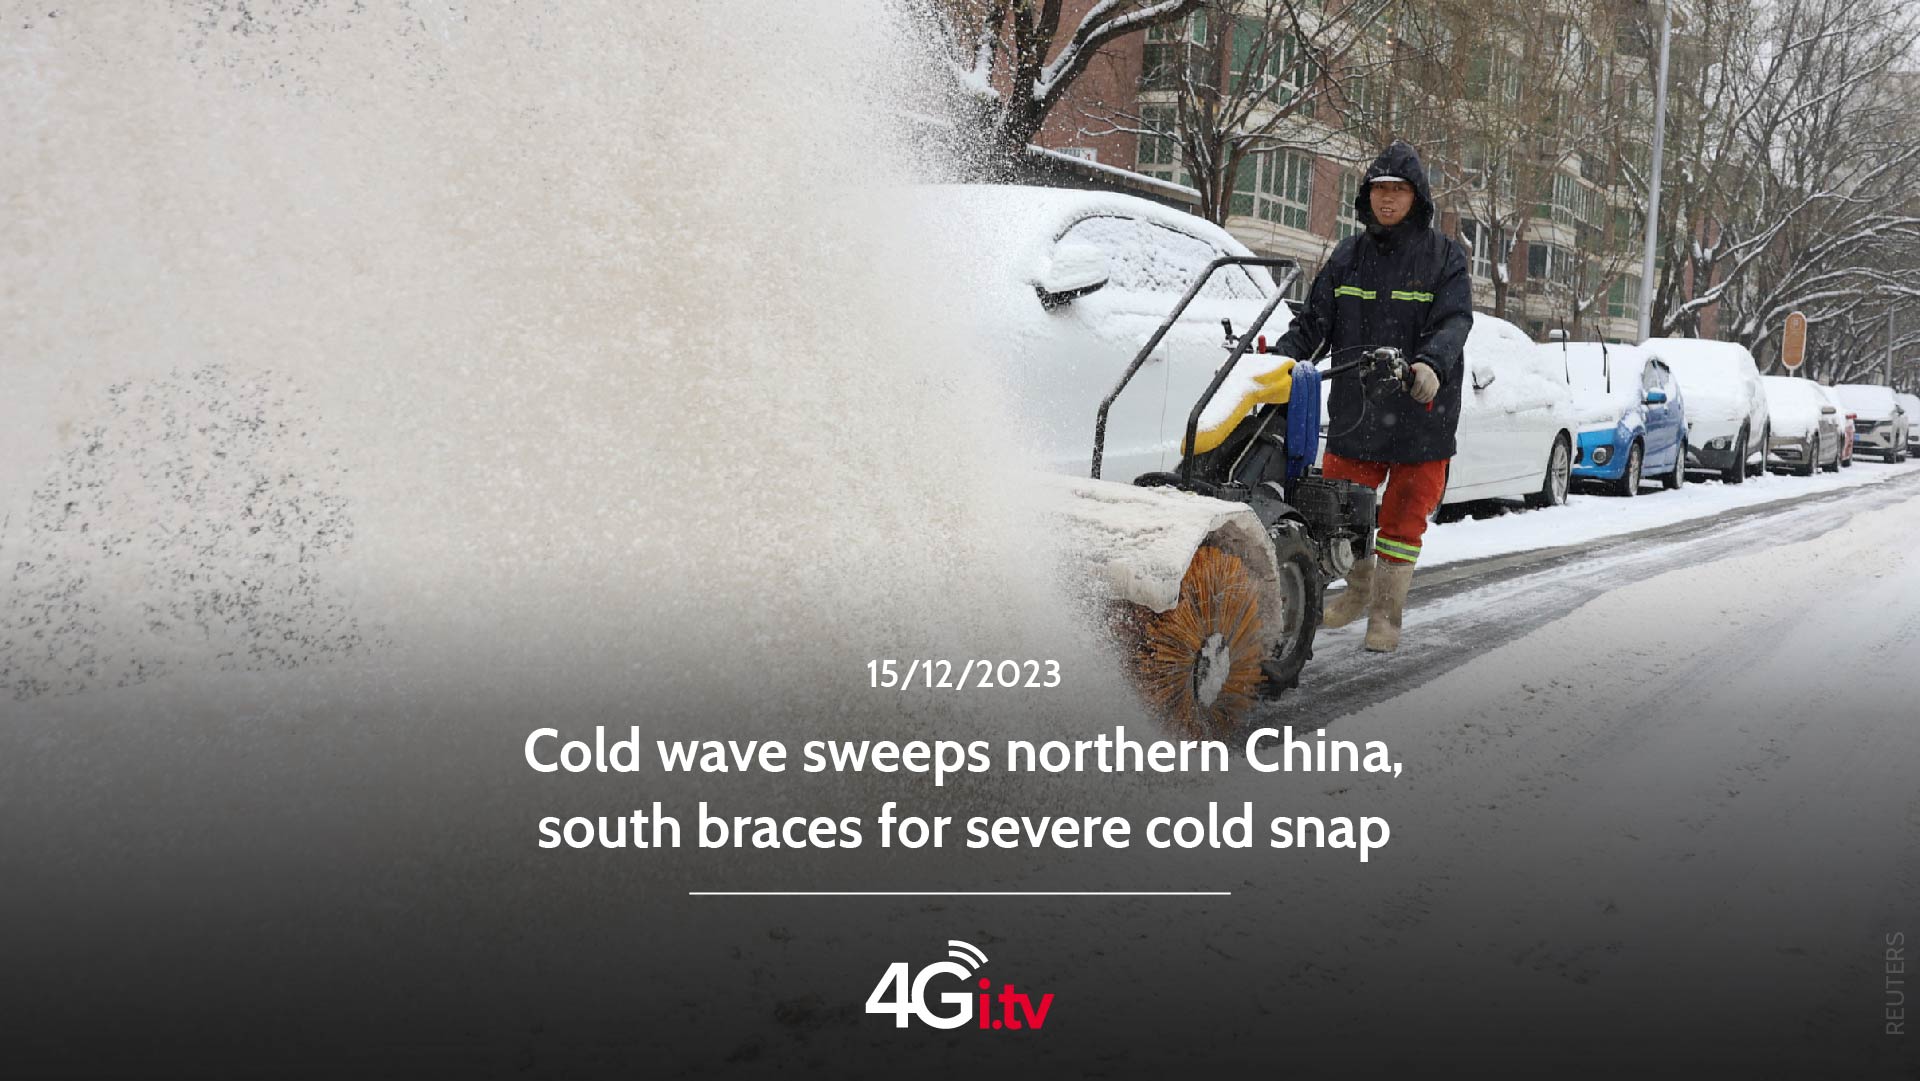 Подробнее о статье Cold wave sweeps northern China, south braces for severe cold snap